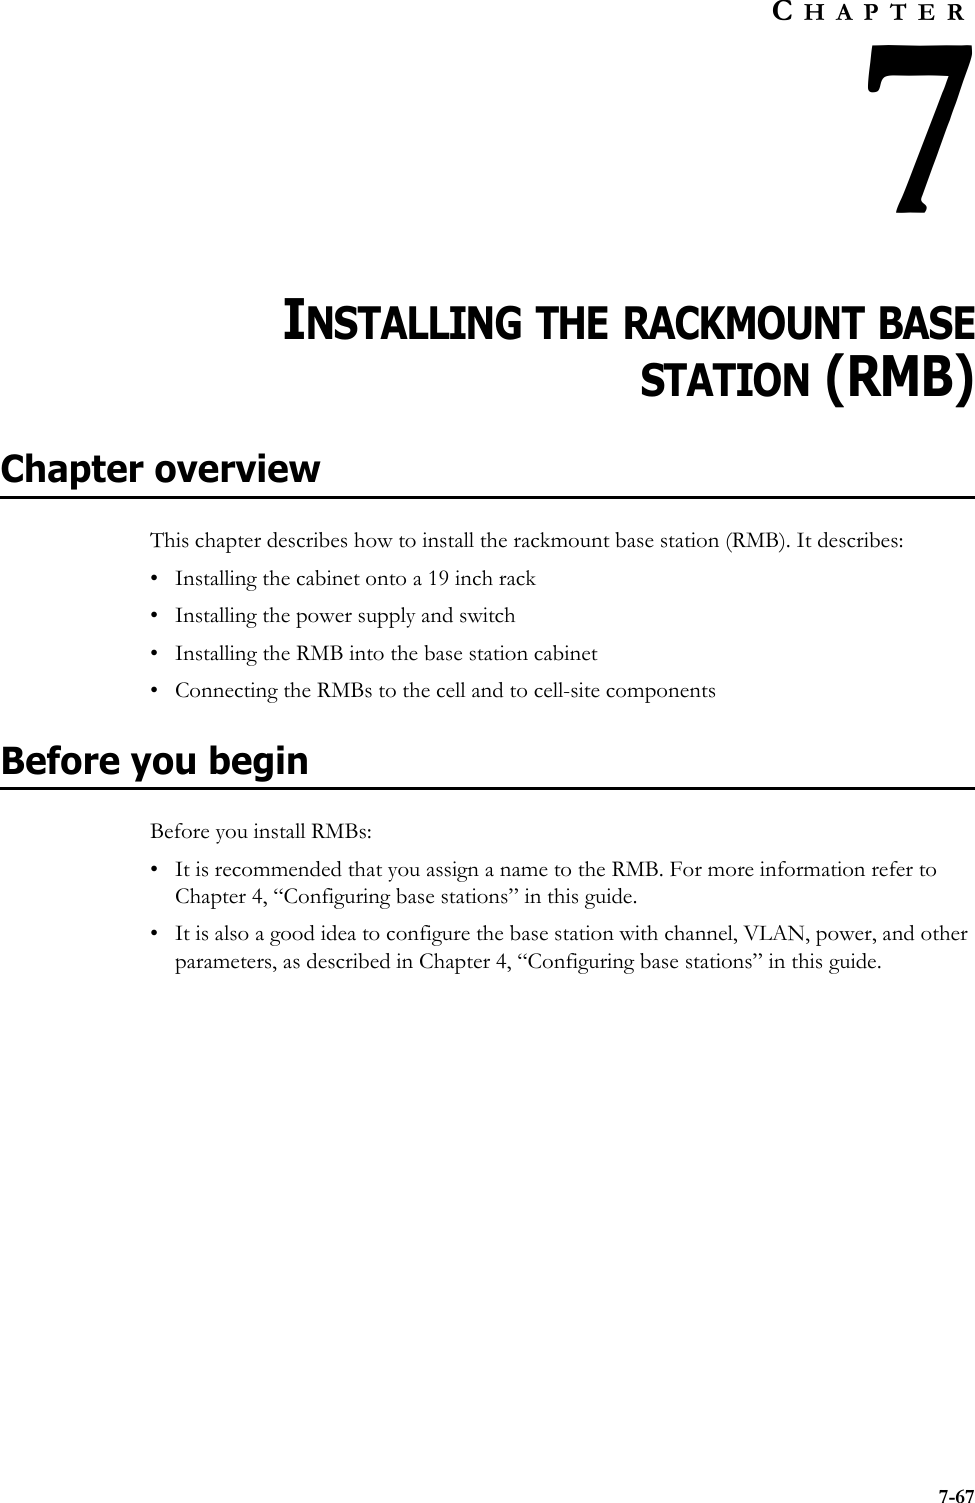 7-67CHAPTER7CHAPTER 7INSTALLING THE RACKMOUNT BASESTATION (RMB)Chapter overviewThis chapter describes how to install the rackmount base station (RMB). It describes:• Installing the cabinet onto a 19 inch rack• Installing the power supply and switch• Installing the RMB into the base station cabinet• Connecting the RMBs to the cell and to cell-site componentsBefore you beginBefore you install RMBs:• It is recommended that you assign a name to the RMB. For more information refer to Chapter 4, “Configuring base stations” in this guide.• It is also a good idea to configure the base station with channel, VLAN, power, and other parameters, as described in Chapter 4, “Configuring base stations” in this guide. 